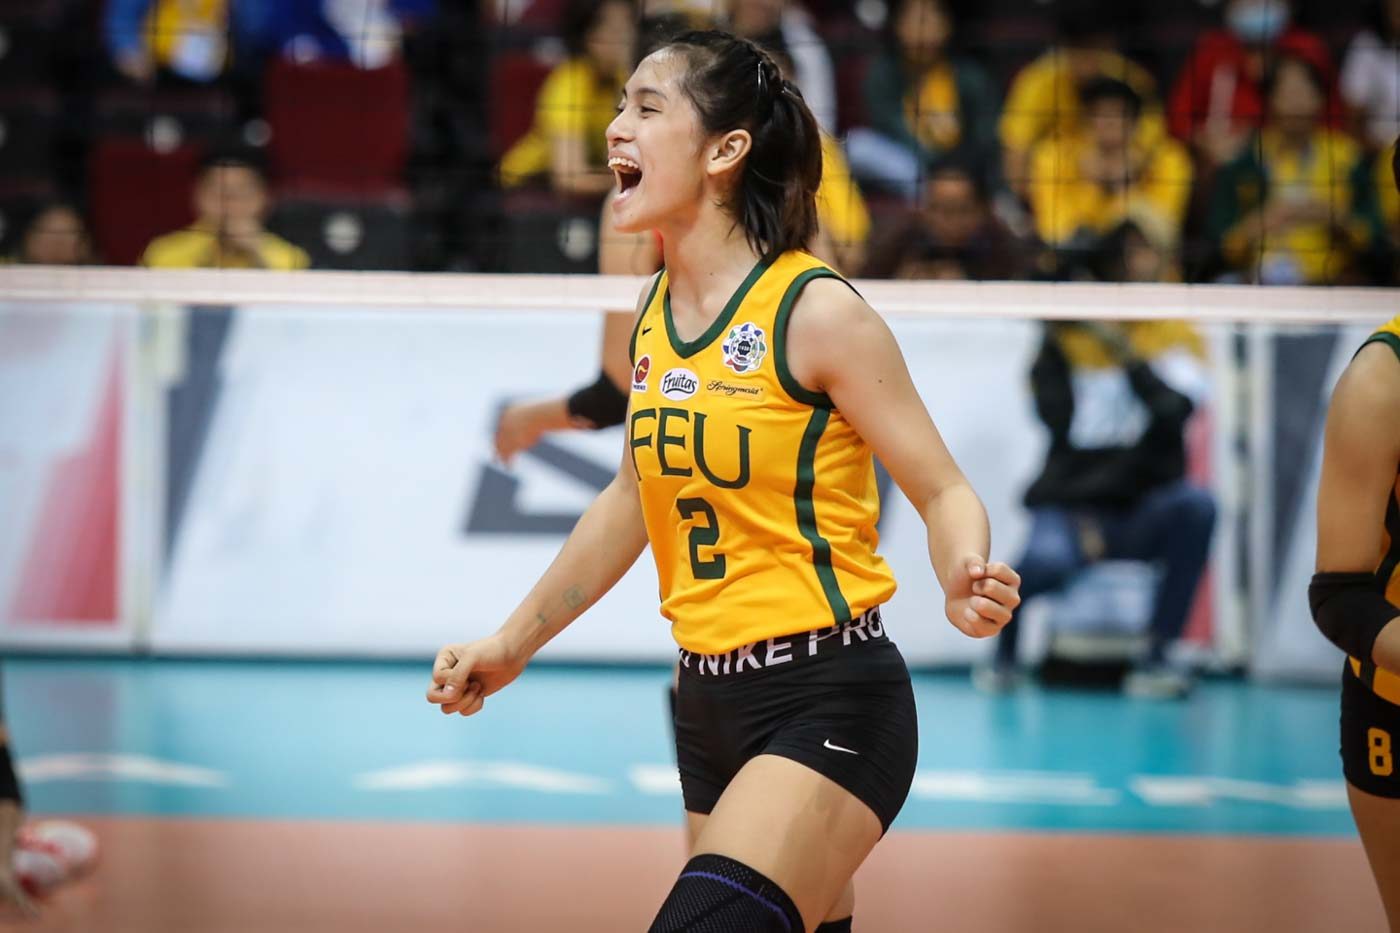 FEU’s Lycha Ebon eager to make up for lost time 11 months after ACL tear